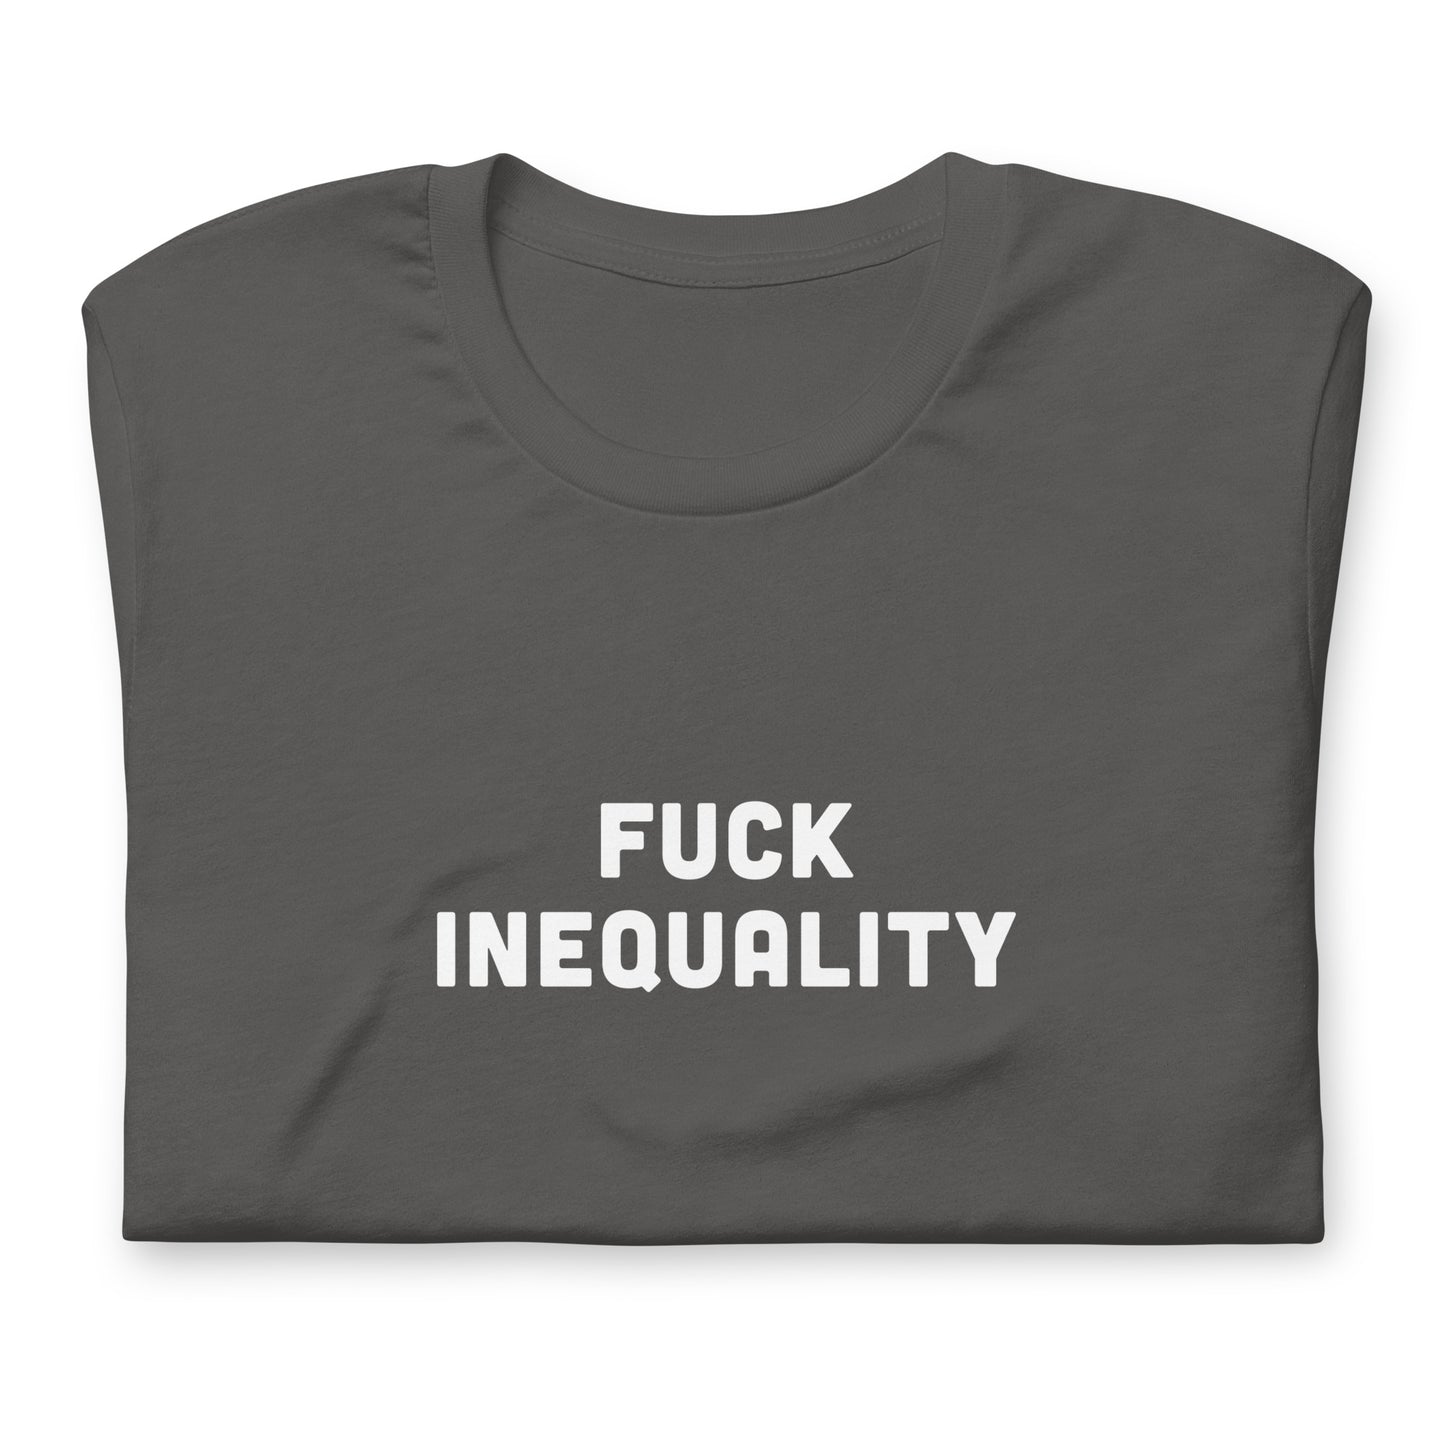 Fuck Inequality T-Shirt Size 2XL Color Black